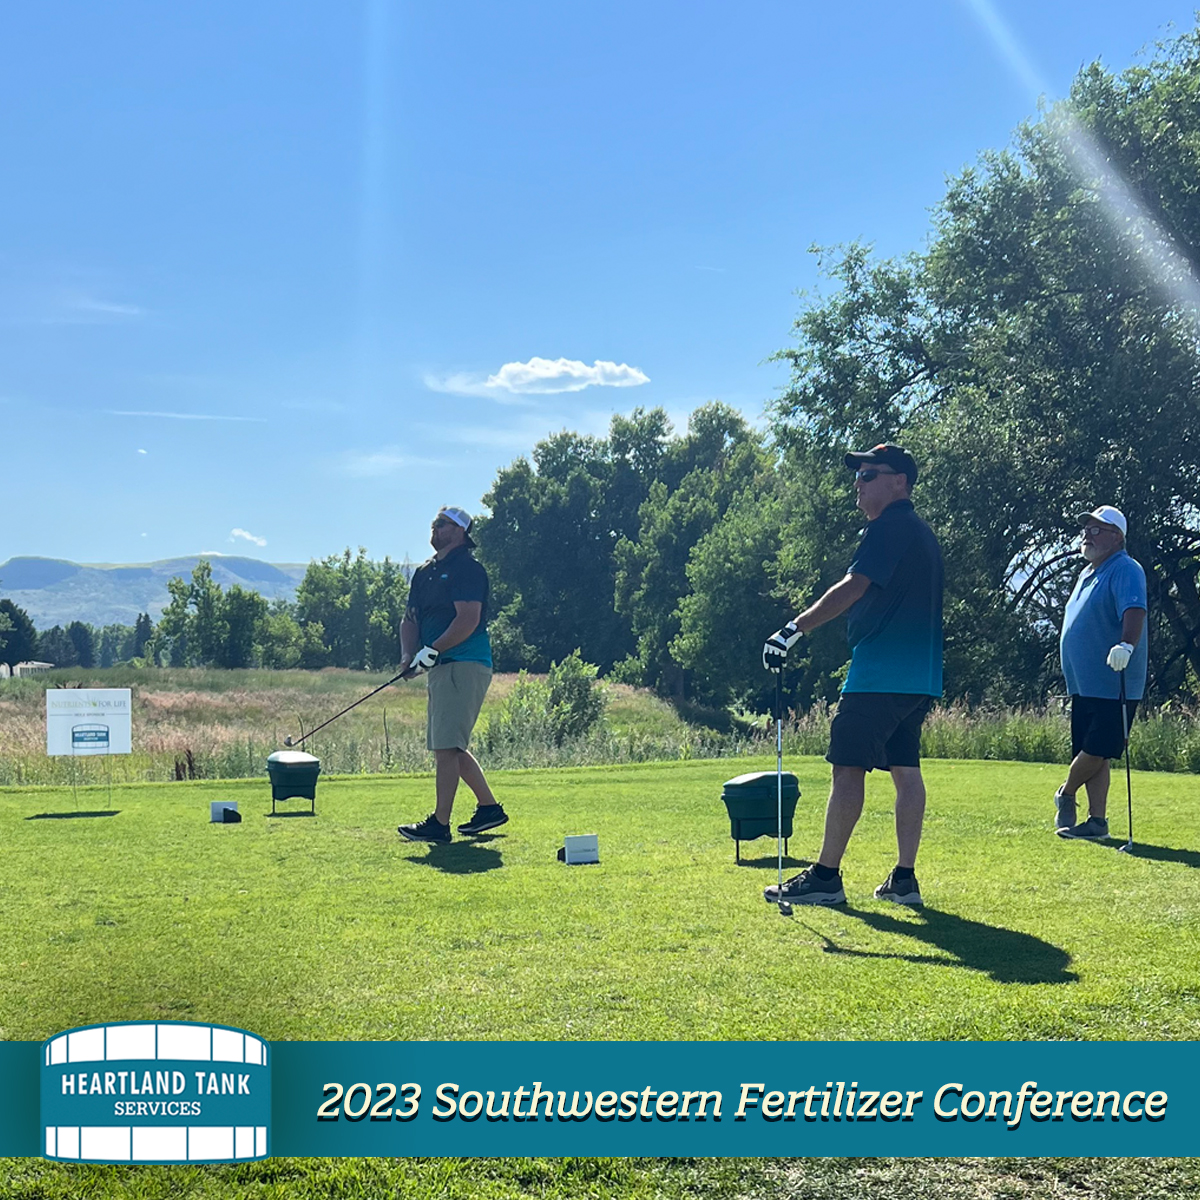 The Heartland Tank team plays in the Southwestern Fertilizer Conference 2023 Golf Tournament.